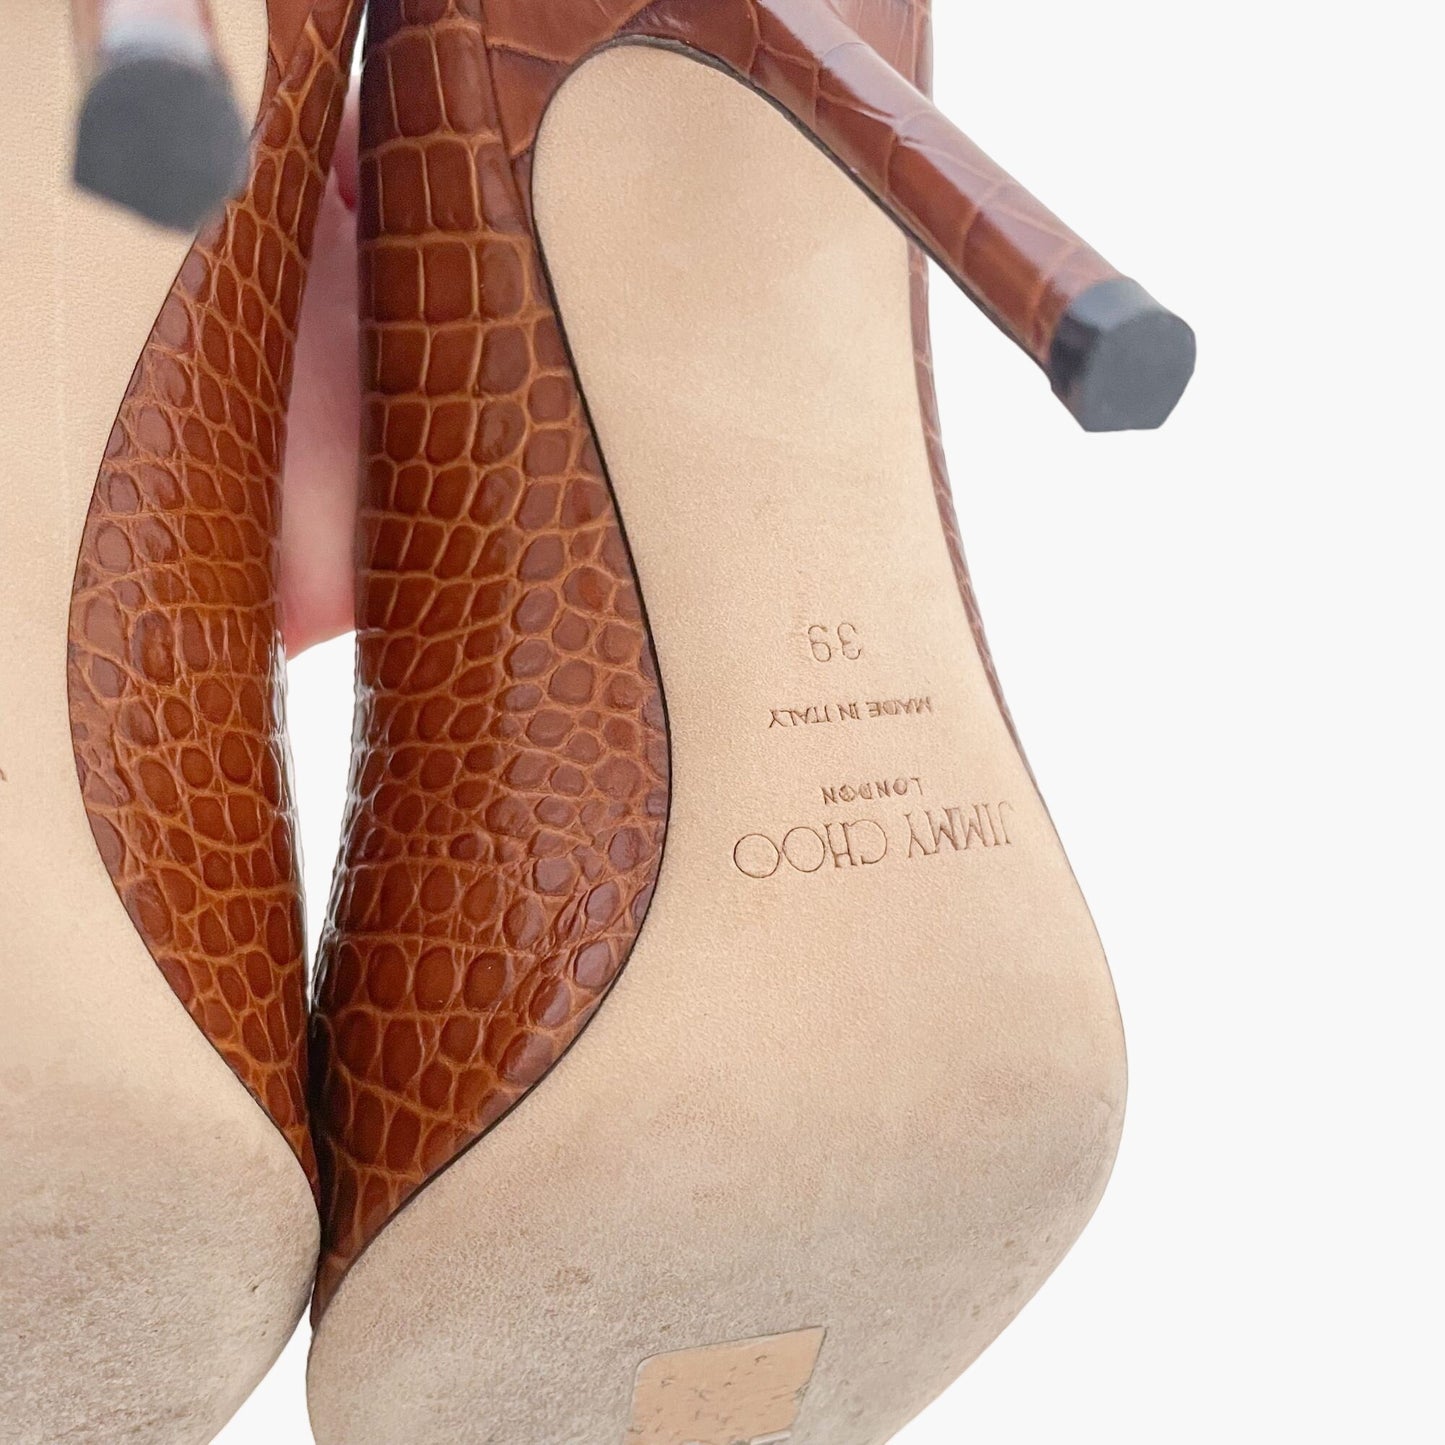 Jimmy Choo Love 100 Pumps in Cuoio (Brown) Croc Embossed Leather Size 39